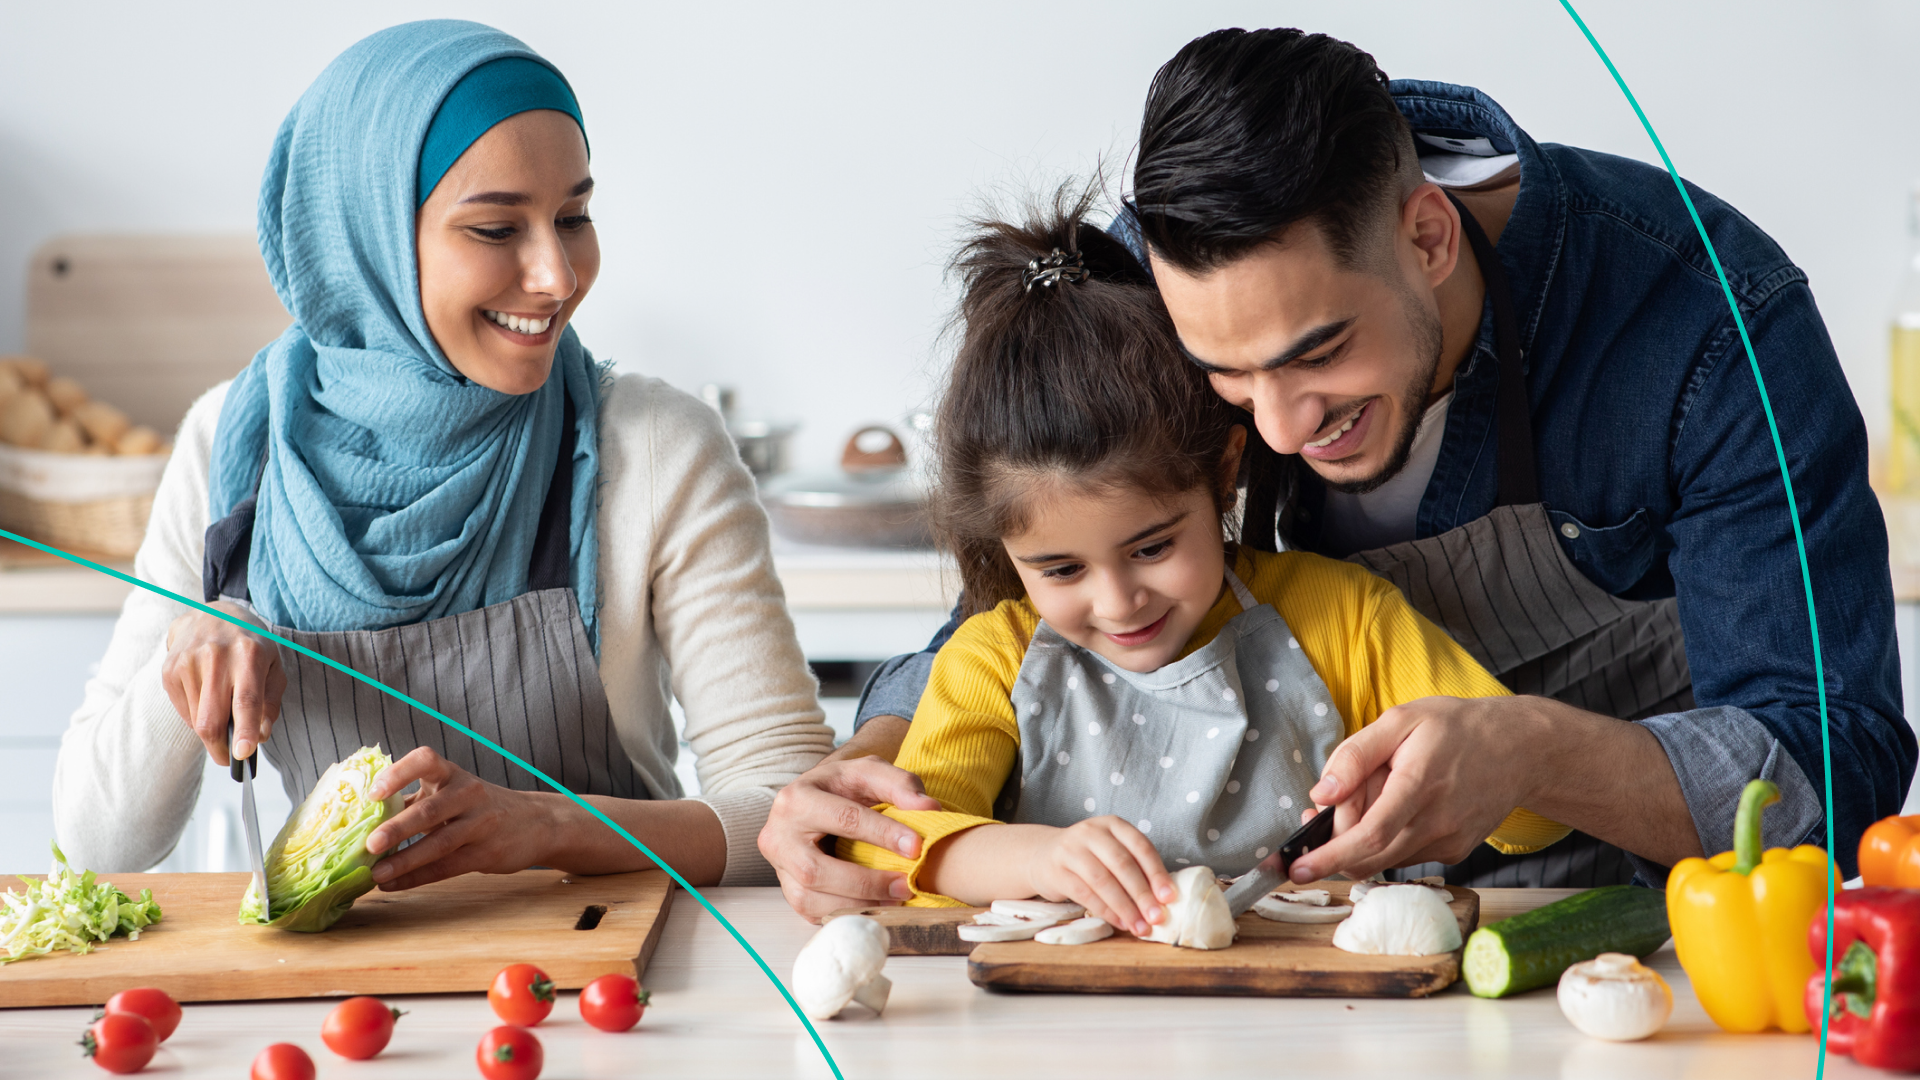 How parents can help kids develop positive relationships with food, according to registered dietitian and founder of 'Kids Eat In Color,' Jennifer Anderson.